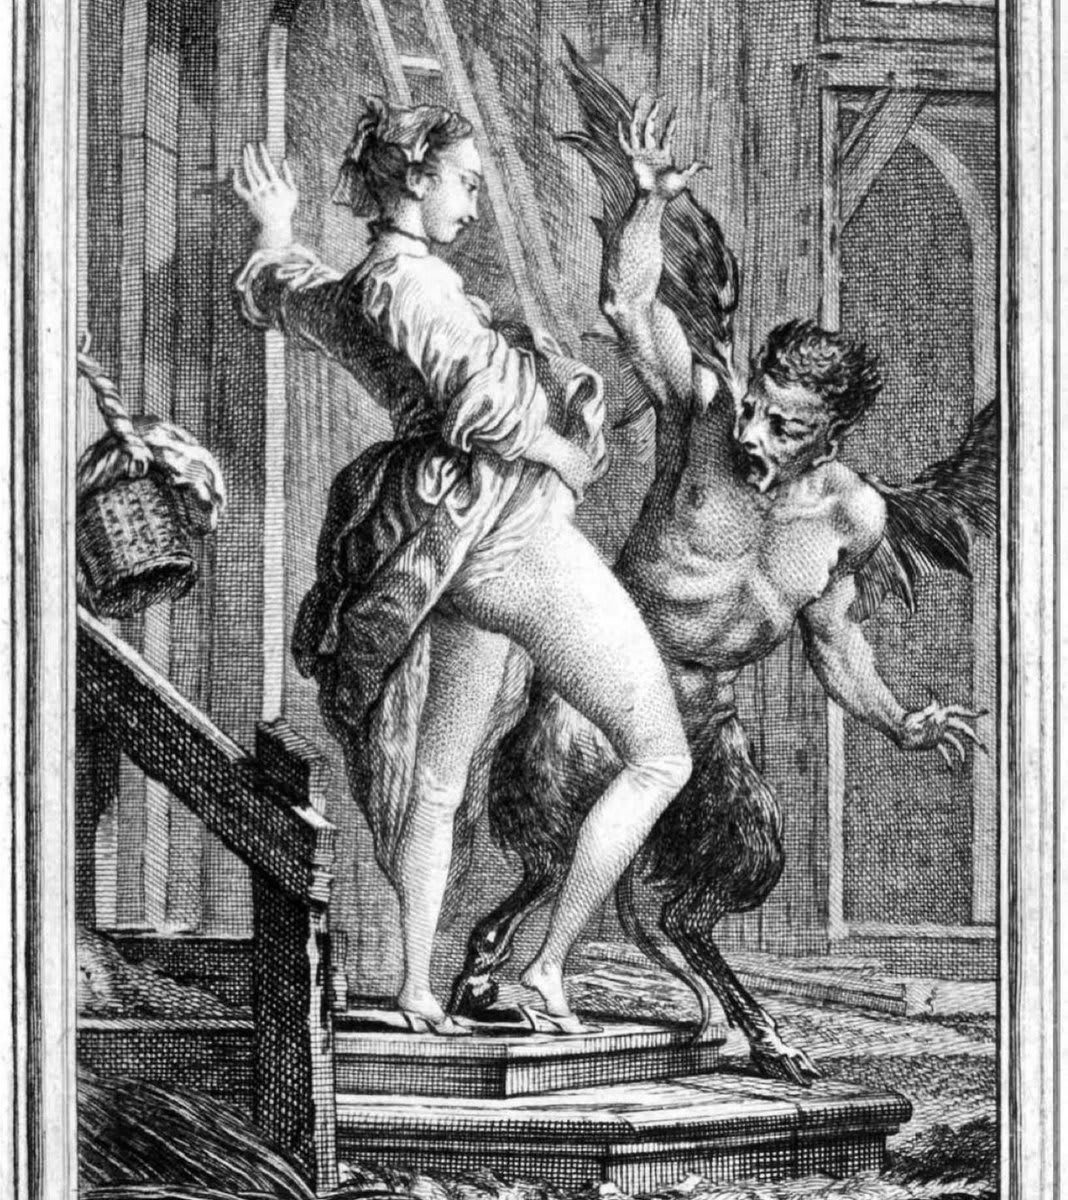 This is a 1762 illustration of a woman warding off the devil with her genitalia. The illustration was used to accompany the poem, “The Devil of Pope Fig Island,” written by a 17th century French poet by the name of Jean de la Fontaine. Go @HistoryInPics Go